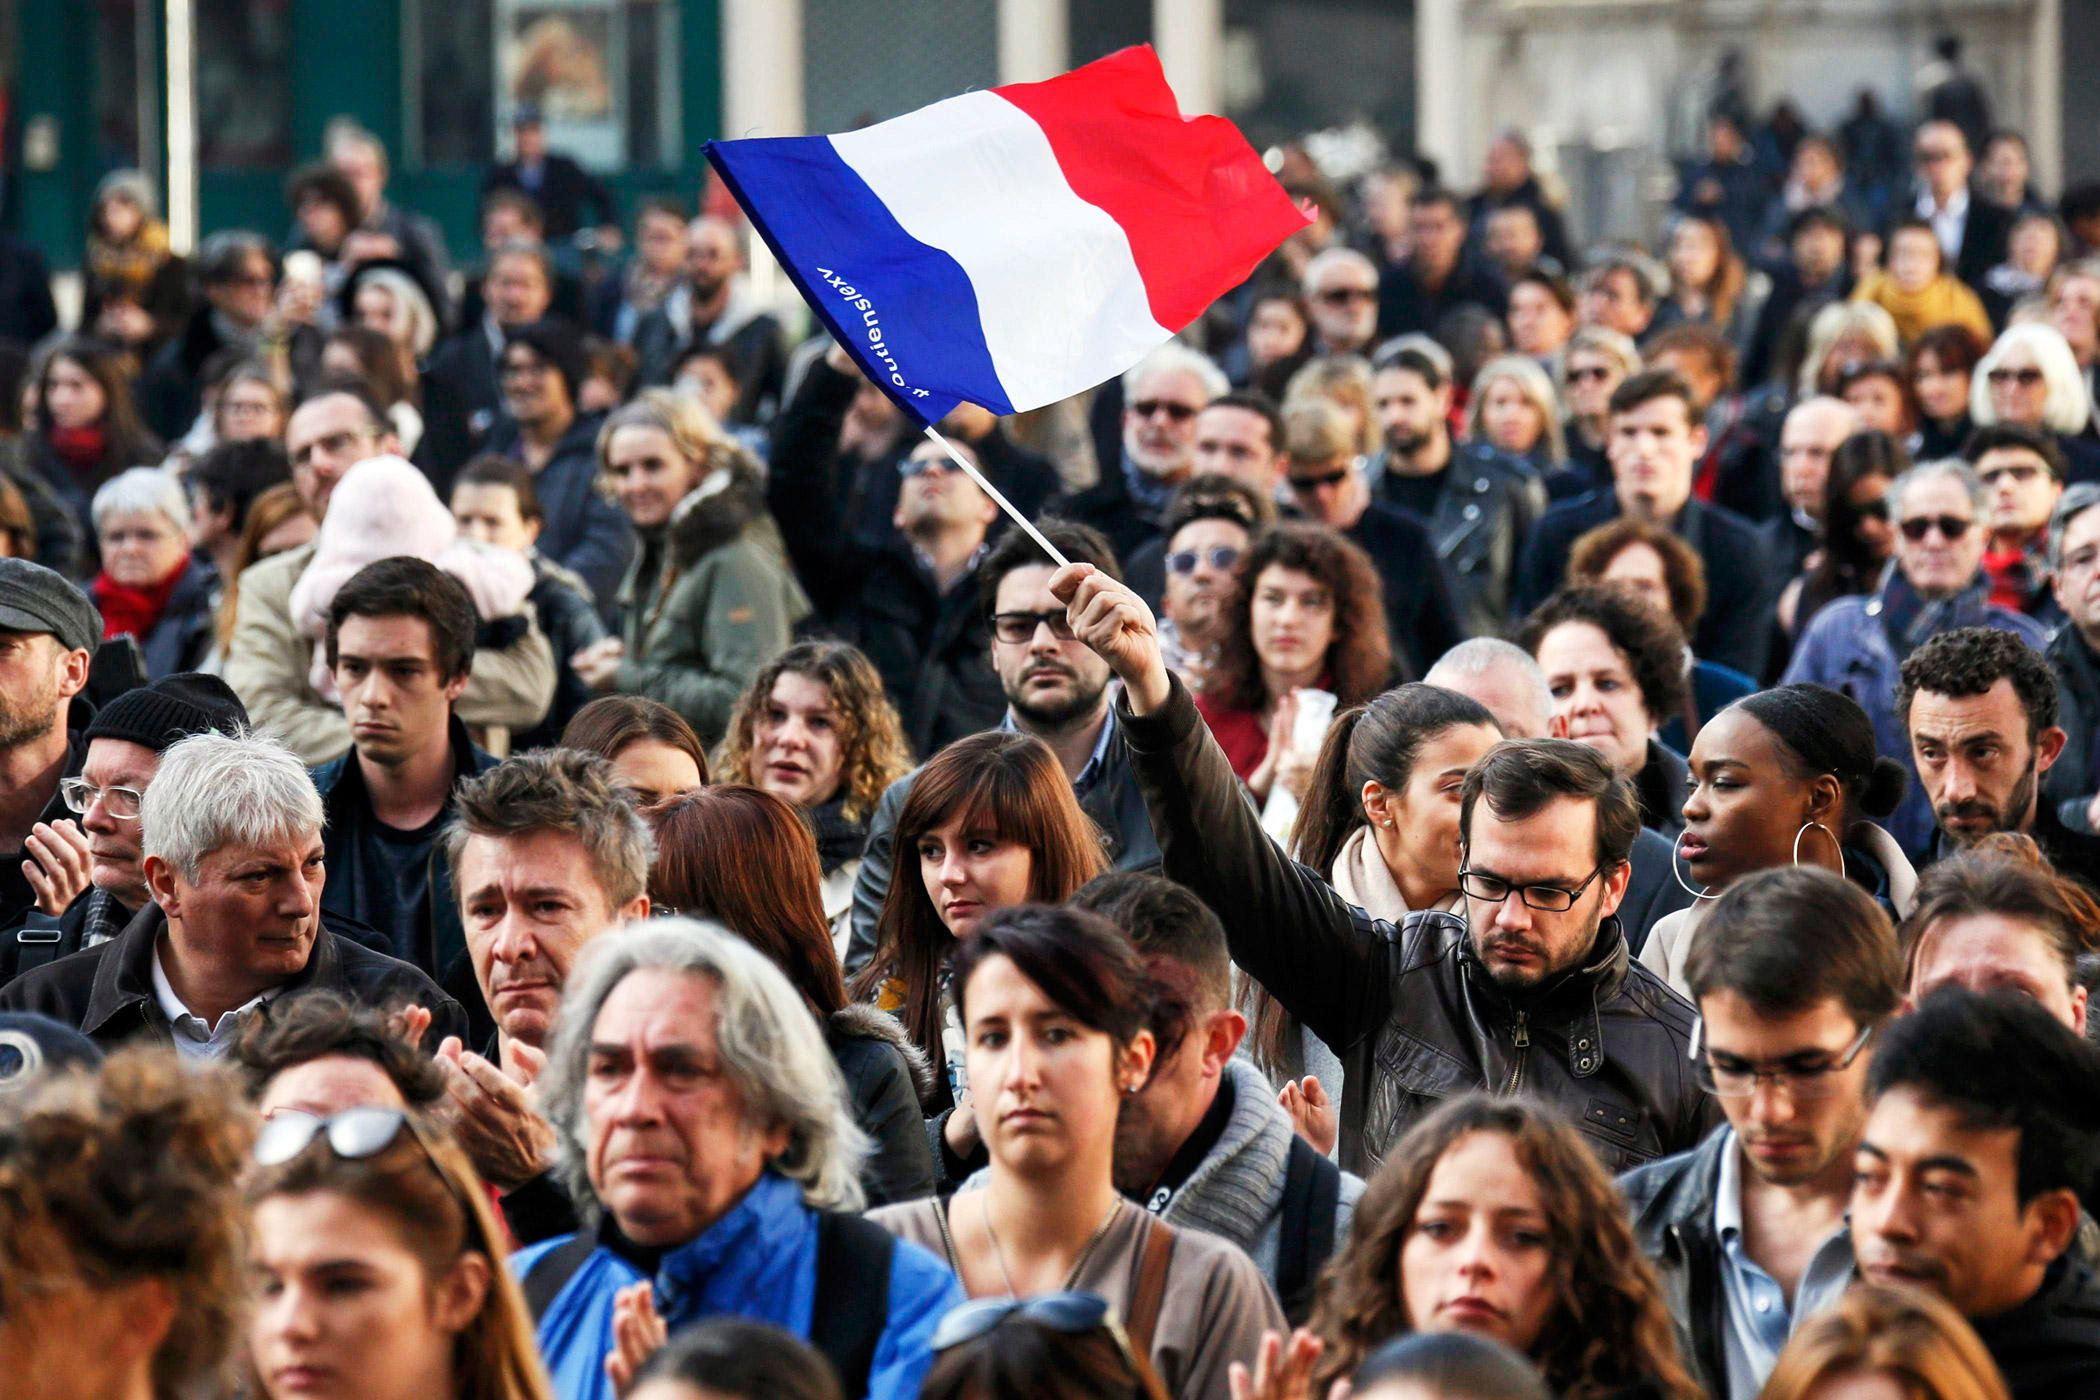 A man waves a French flag during a minute of silence in Lyon, France.